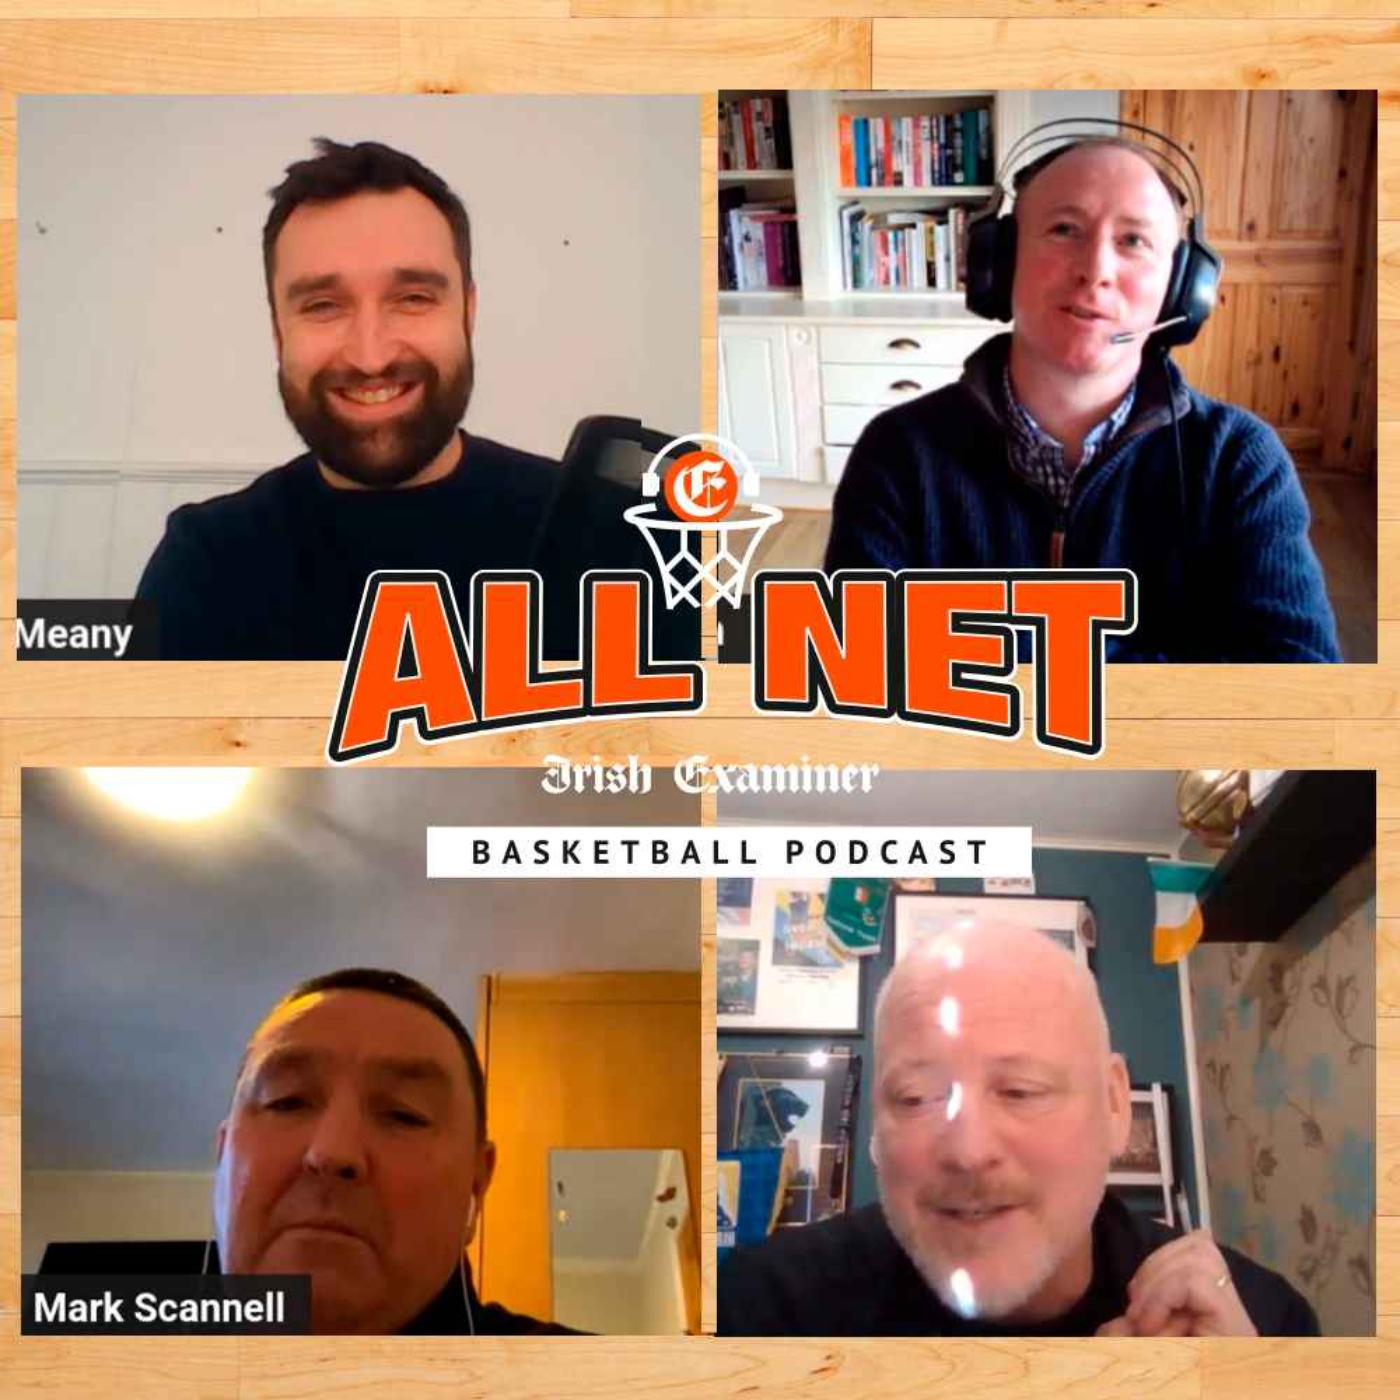 All Net - The Irish Examiner Basketball Show:   Cup Finals preview - dirty chaos and red zone execution